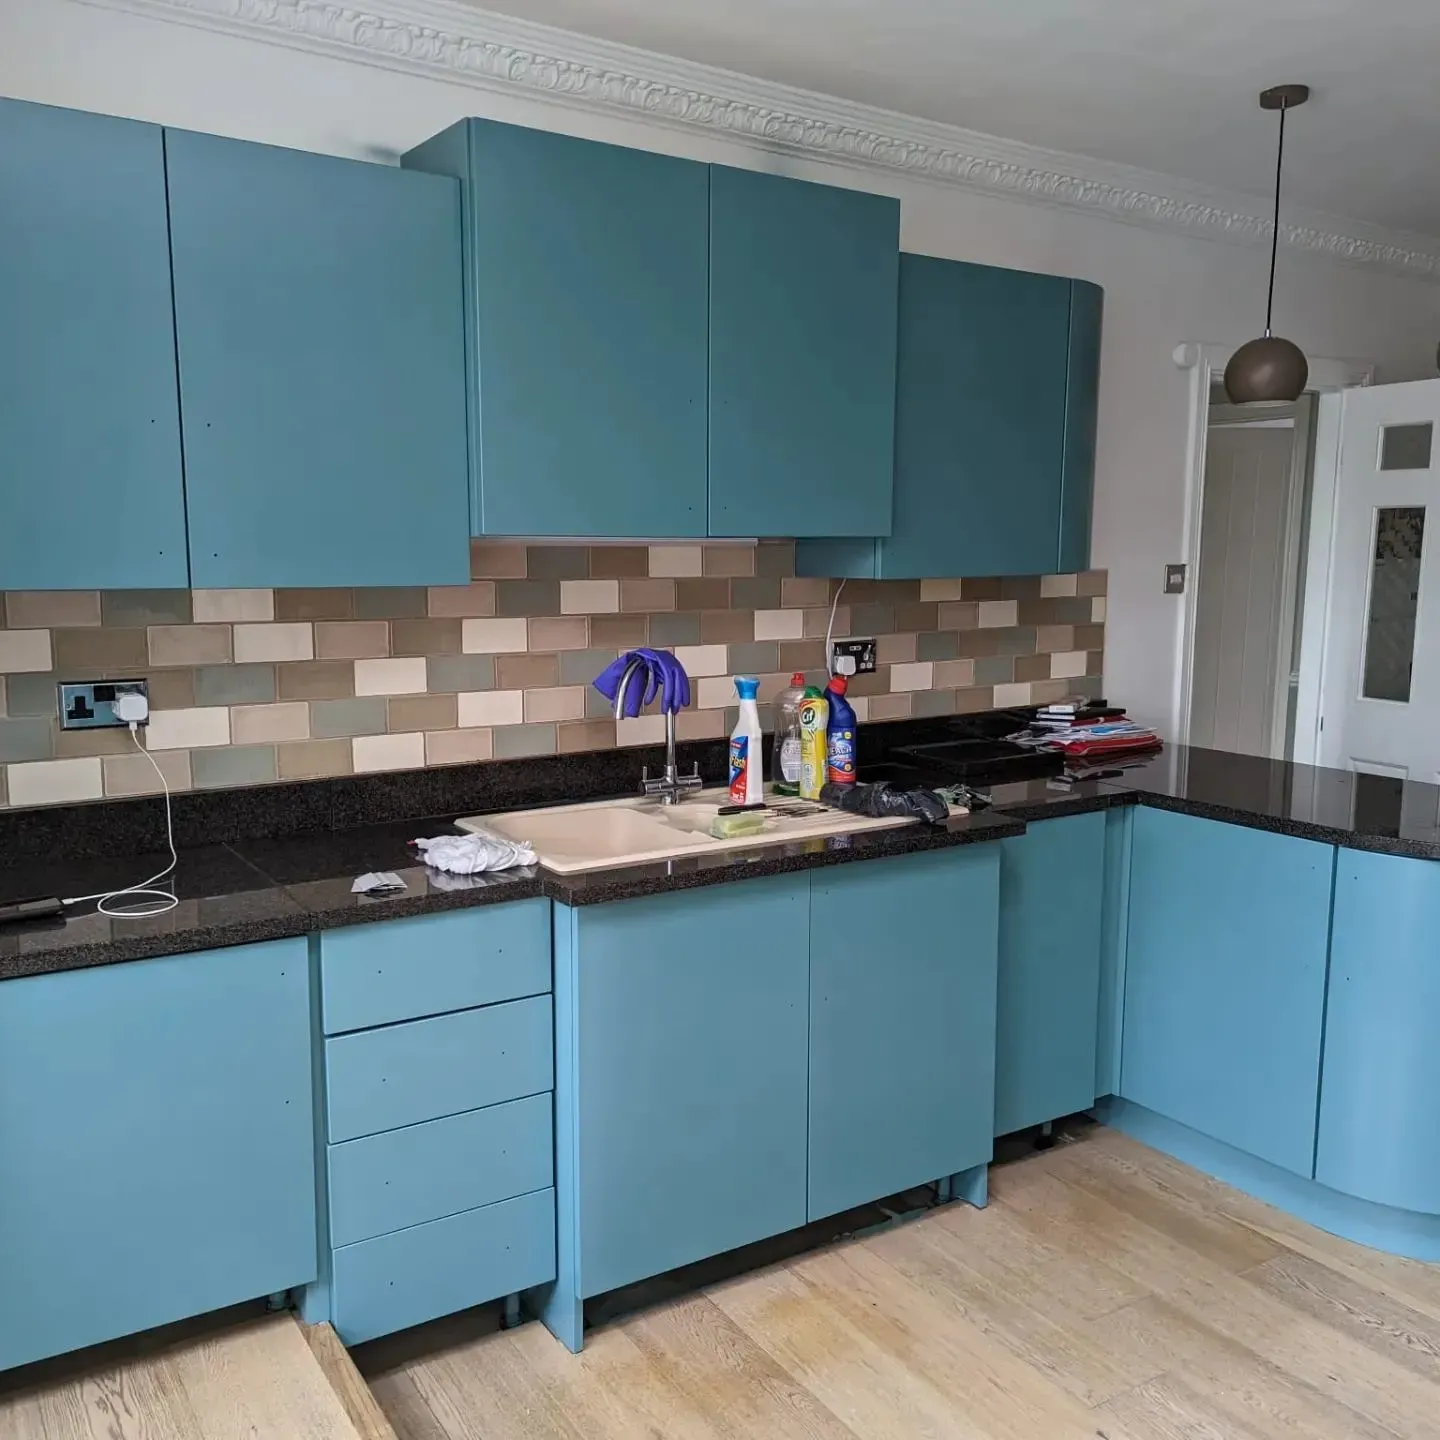 Dulux Maritime Teal kitchen cabinets color